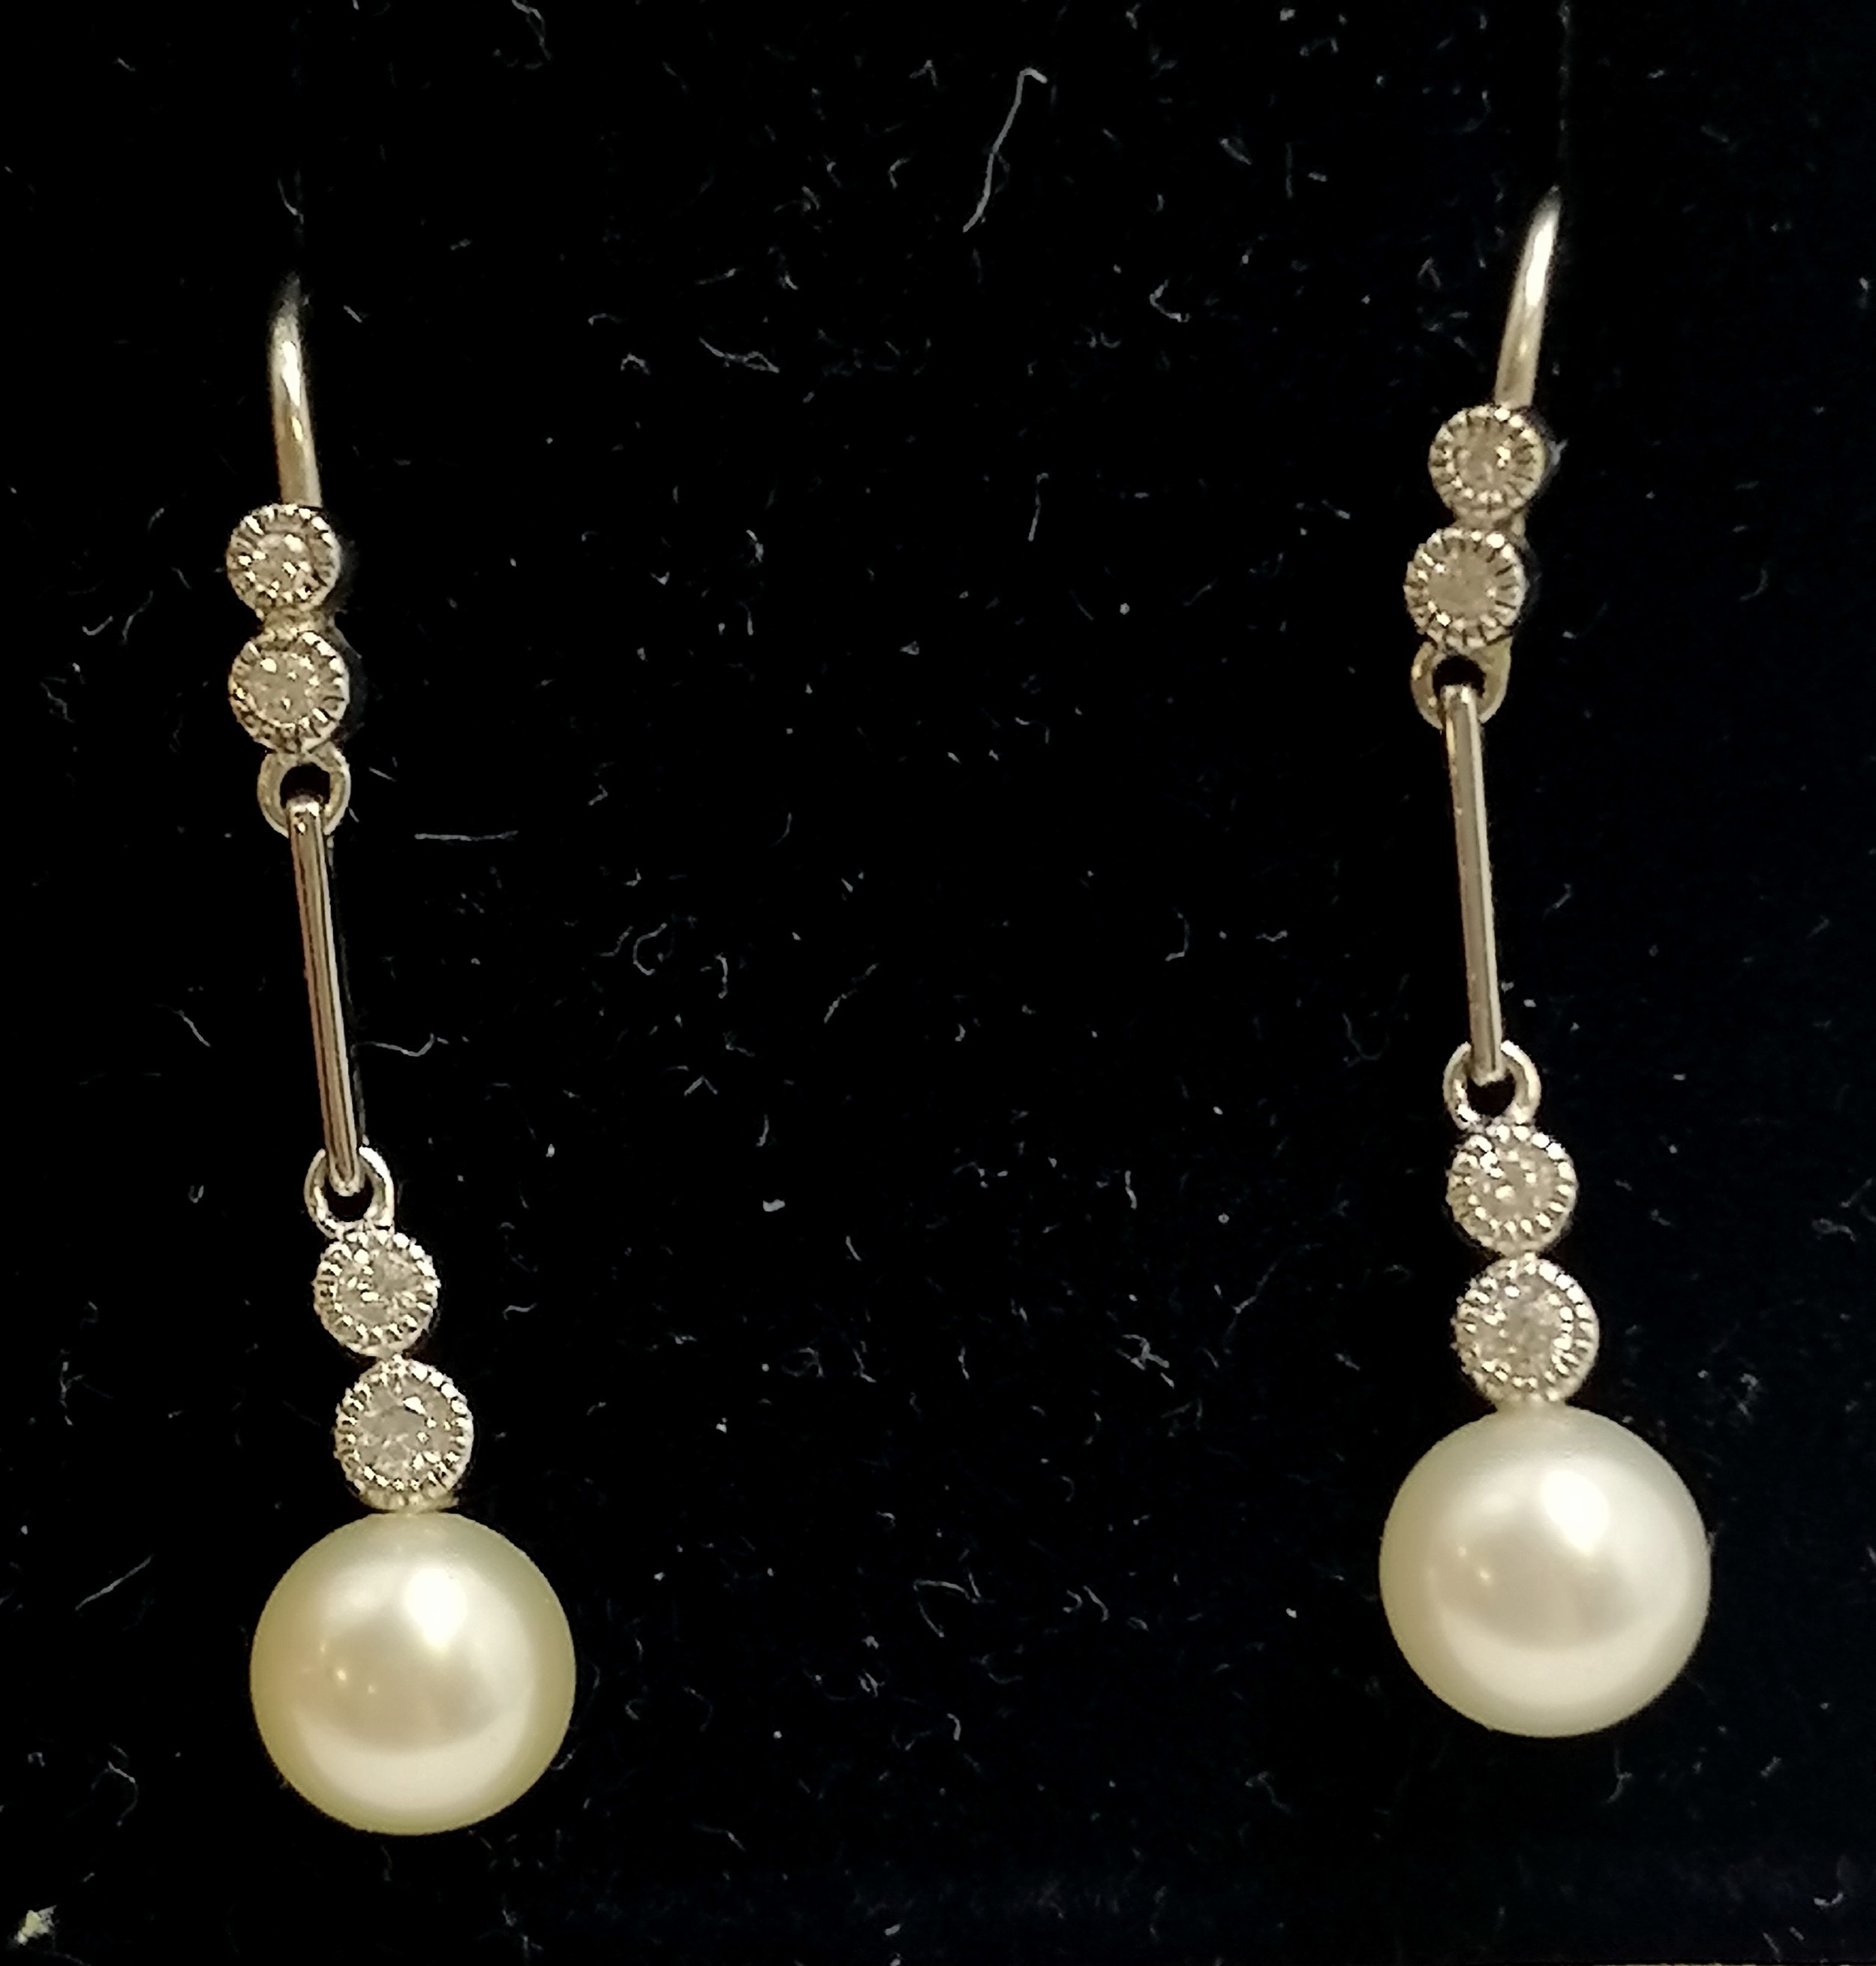 Unmarked 18ct white gold diamond & pearl drop earrings - 3cm drop & 2.4g total weight - Image 2 of 2